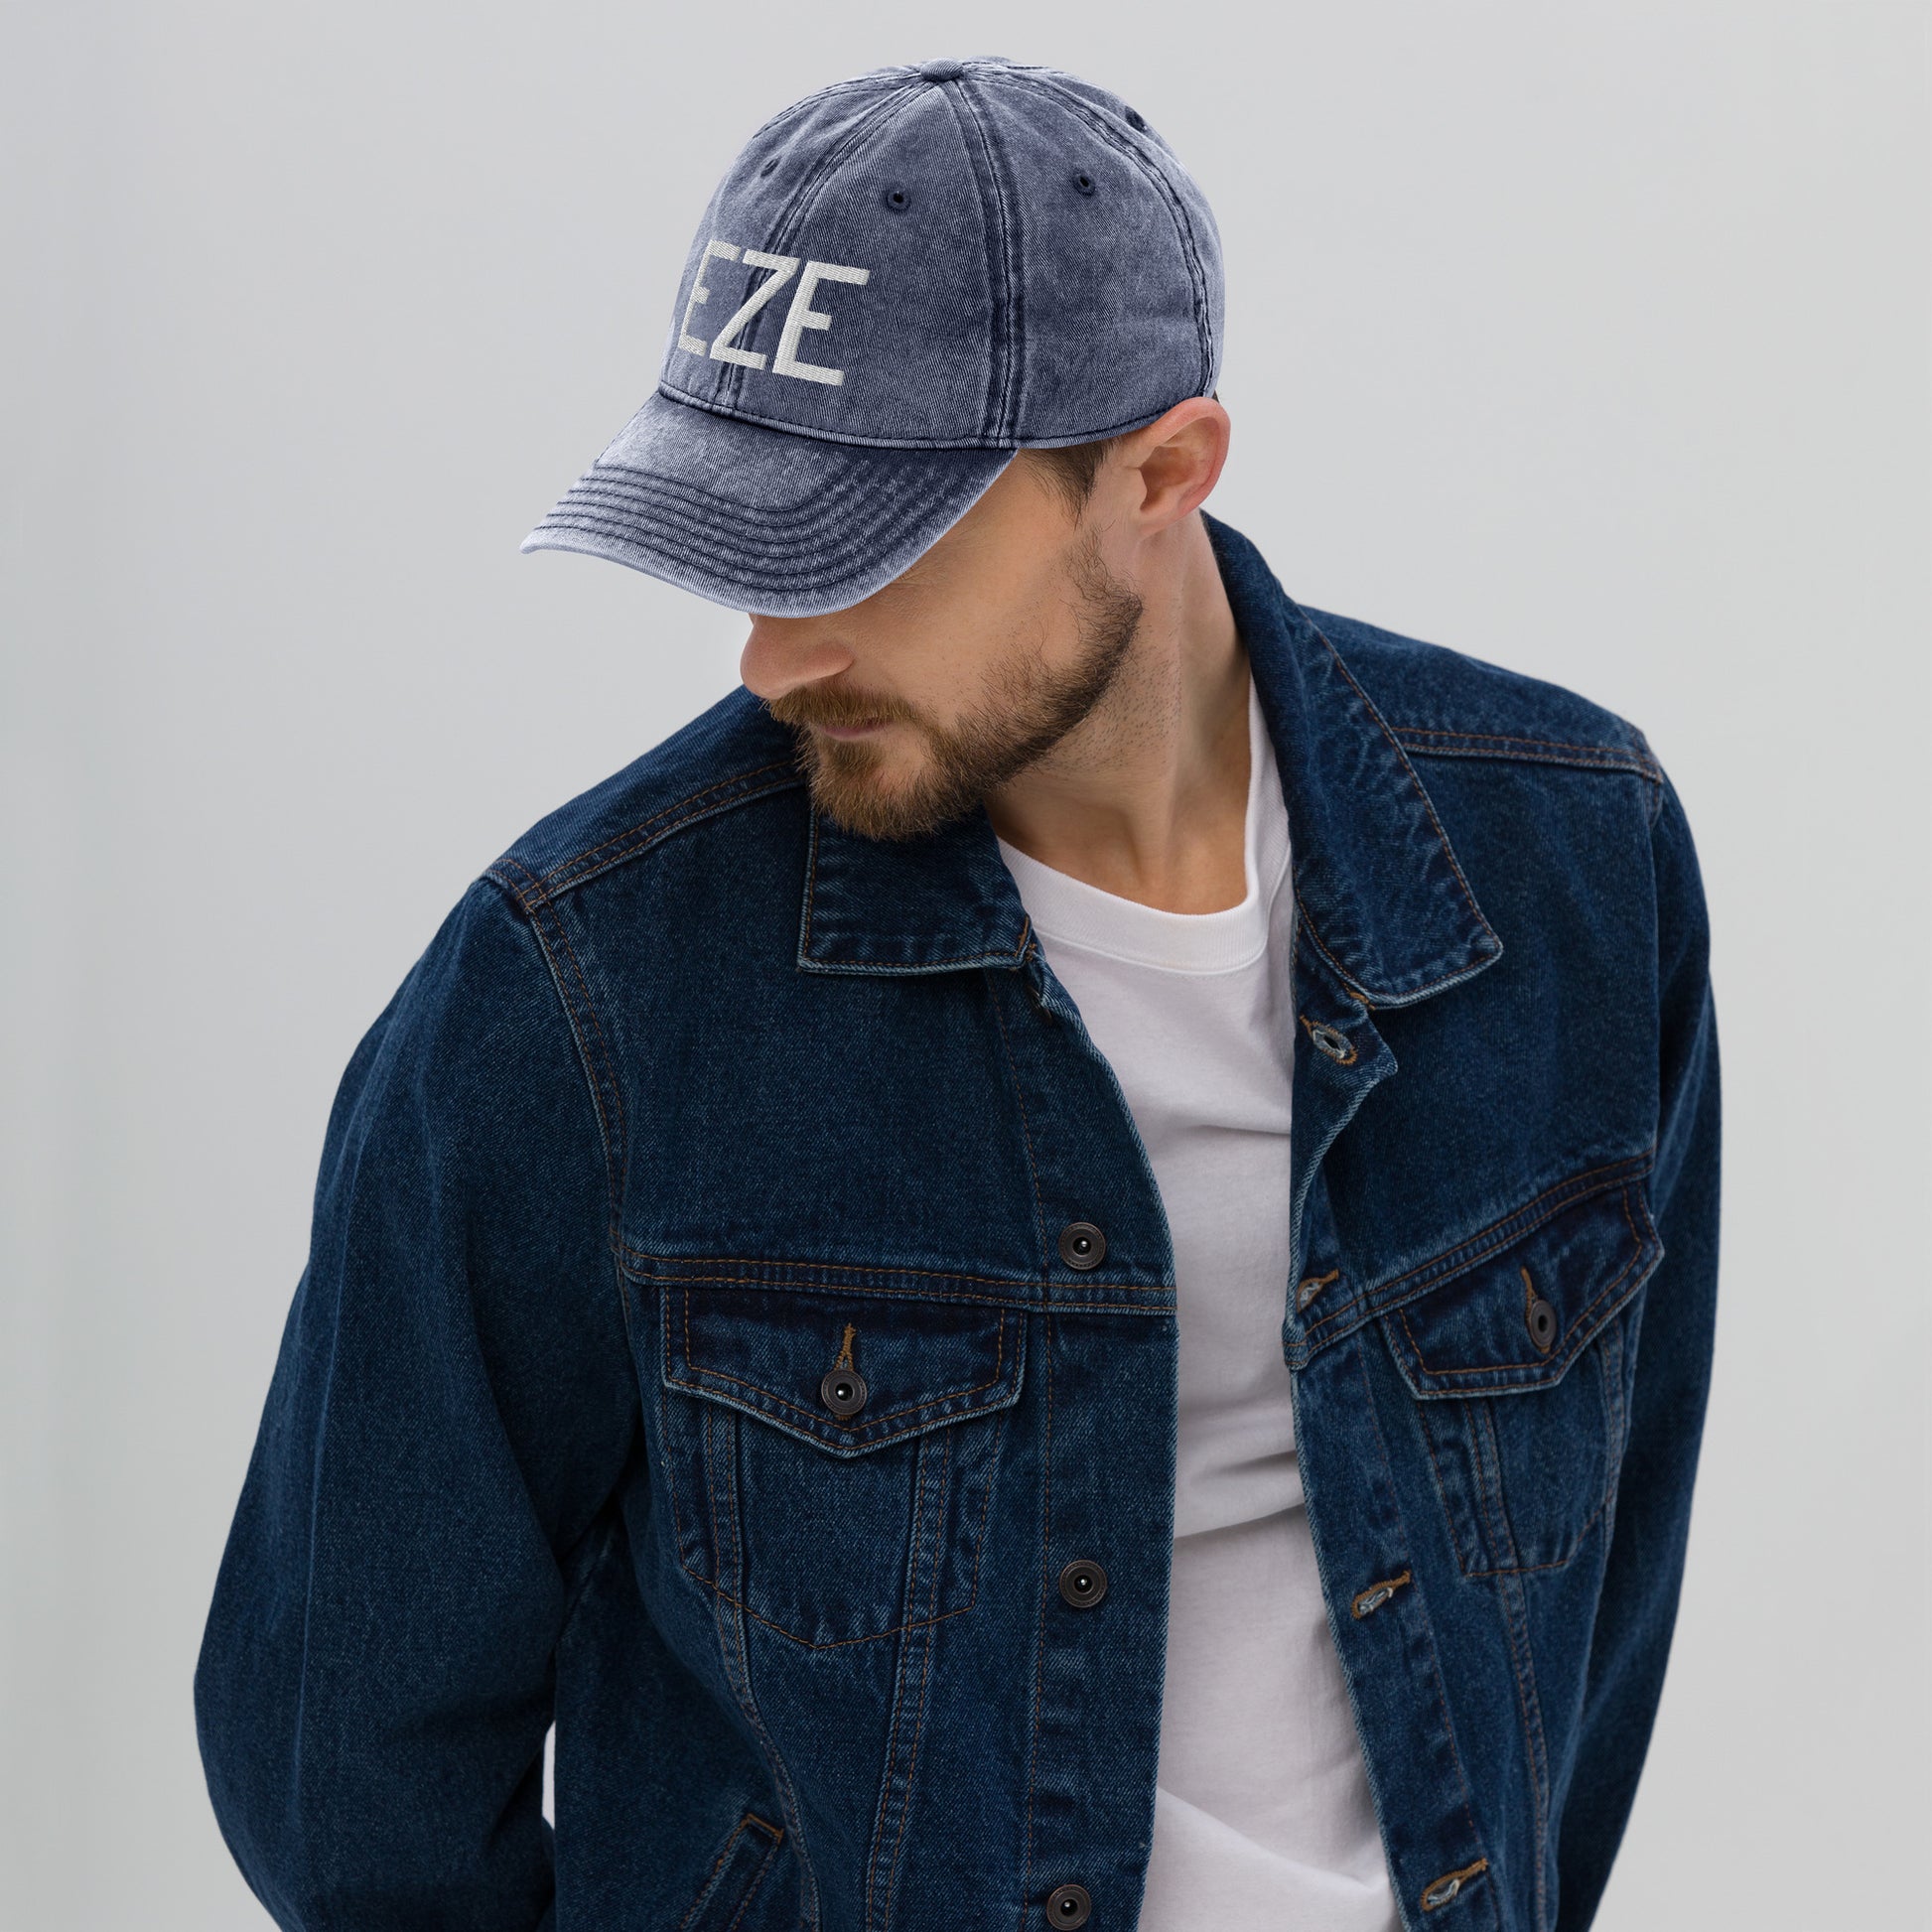 Airport Code Twill Cap - White • EZE Buenos Aires • YHM Designs - Image 04